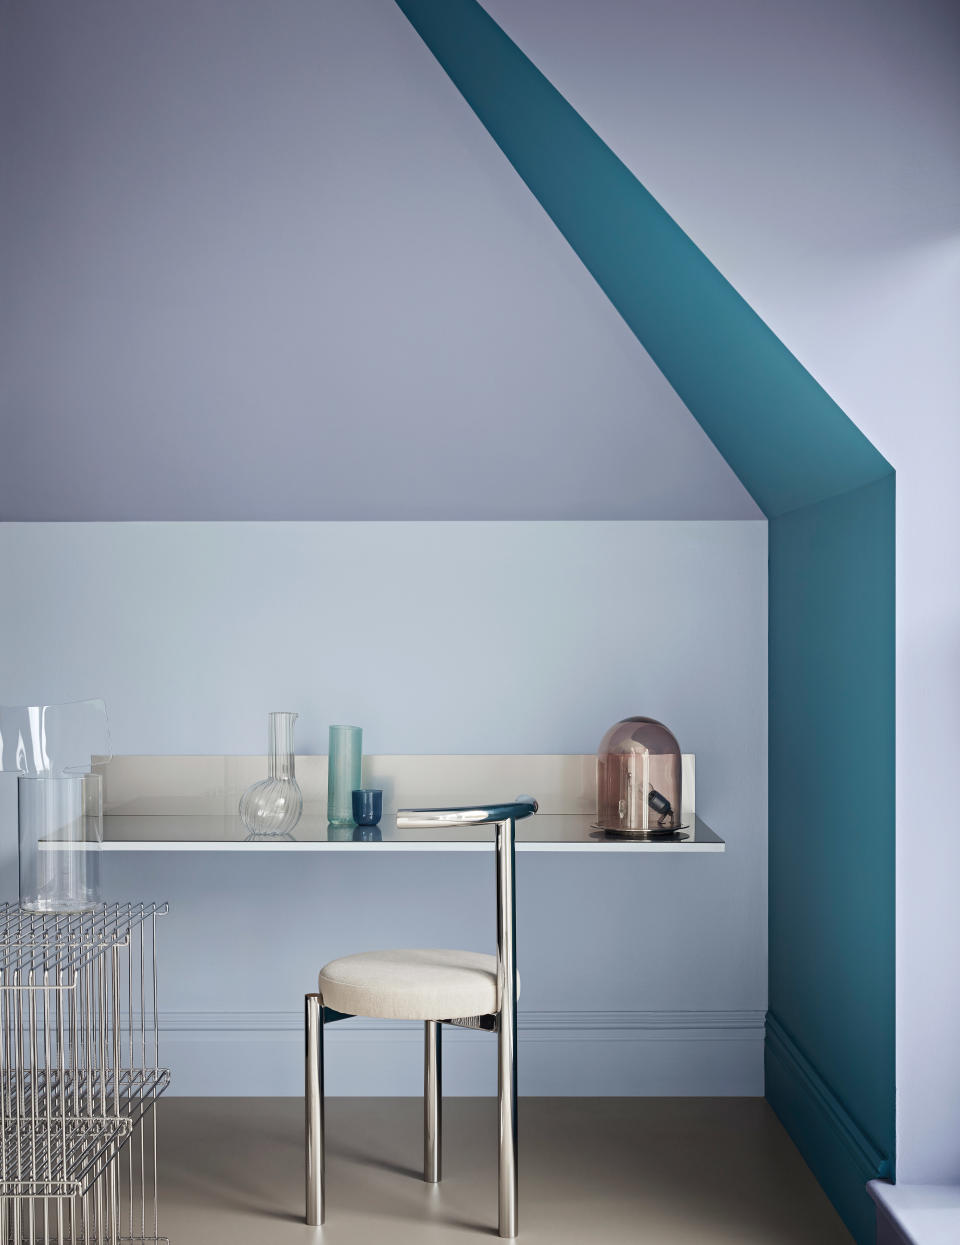 <p> Unusually shaped walls can be seen as an annoying burden, or they can be seen as an interesting architectural feature that you can accentuate with color. These pastel blue hues make for a calm and collected space. The contrasting dark blue paint makes a great ceiling idea and creates the impression of a cozy and cocooning nook. </p>